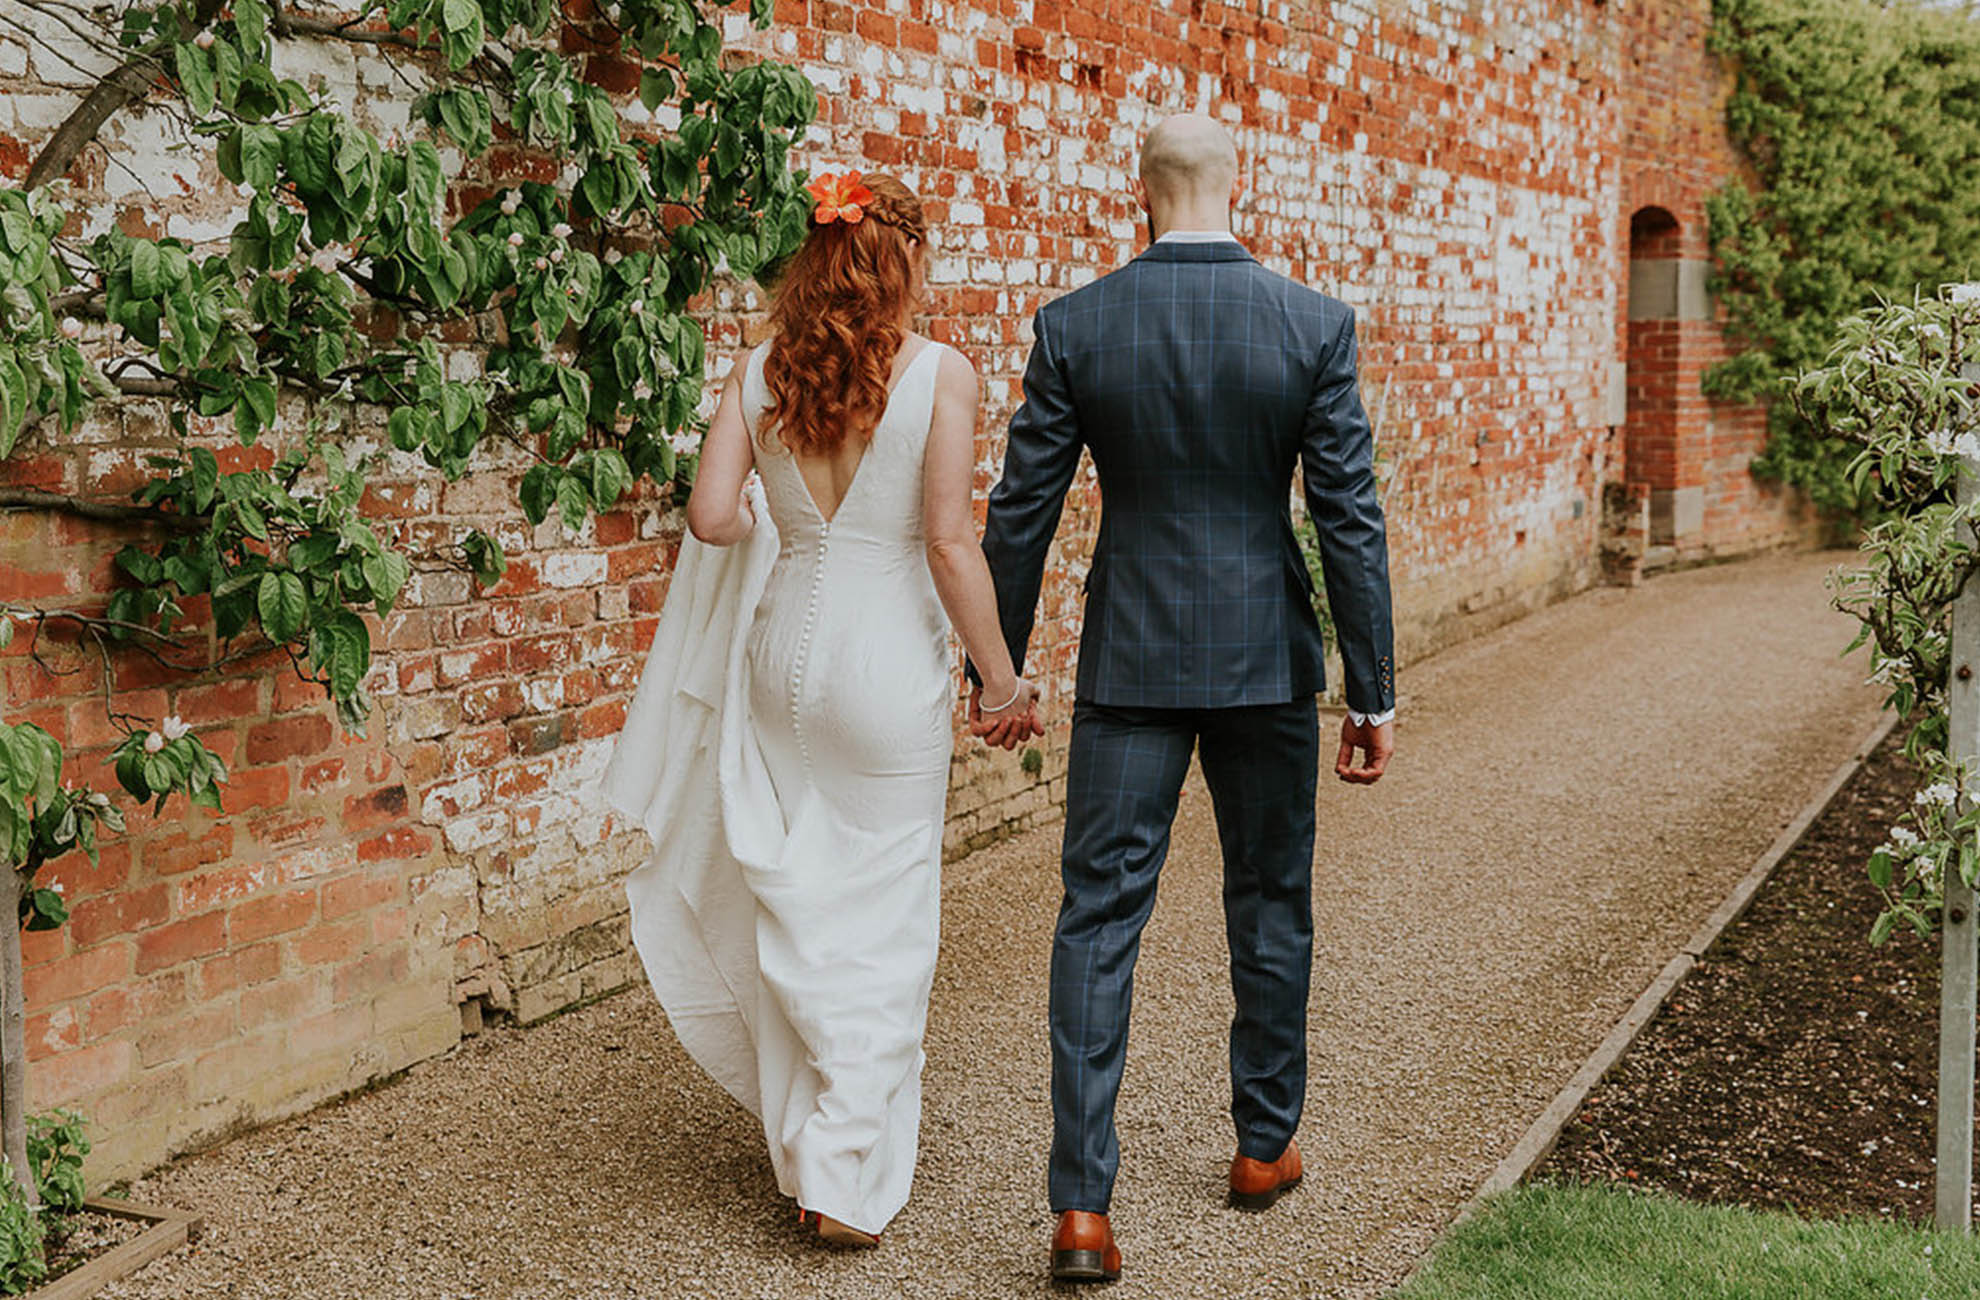 Newlyweds explore the grounds at Combermere Abbey wedding venue in Cheshire